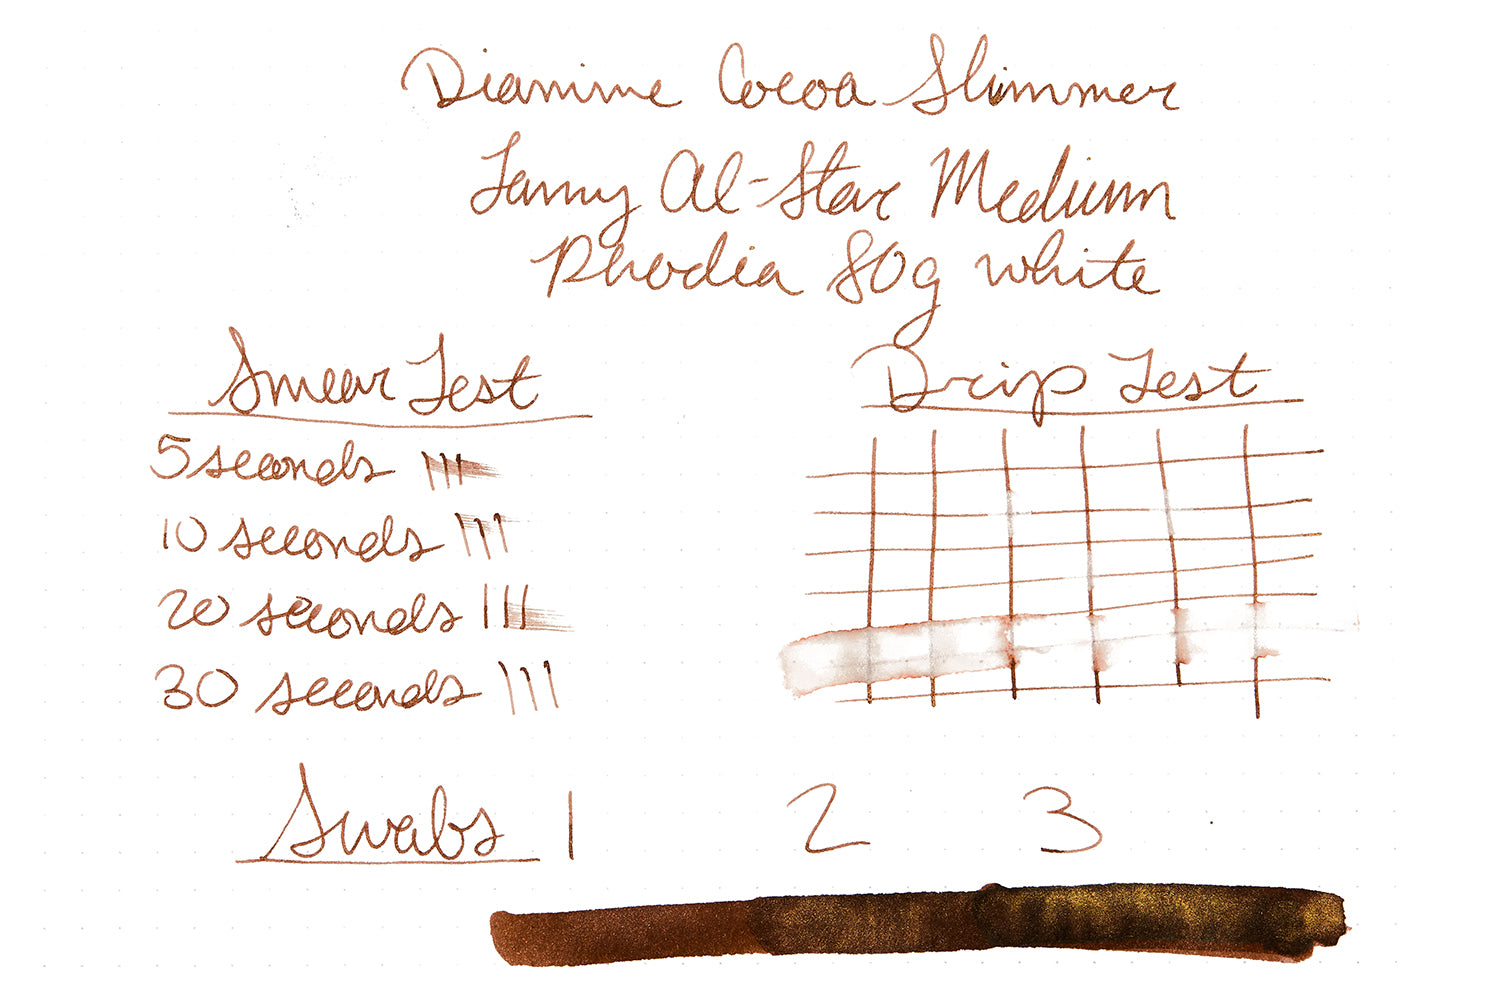 Diamine Cocoa Shimmer ink review on Rhodia paper